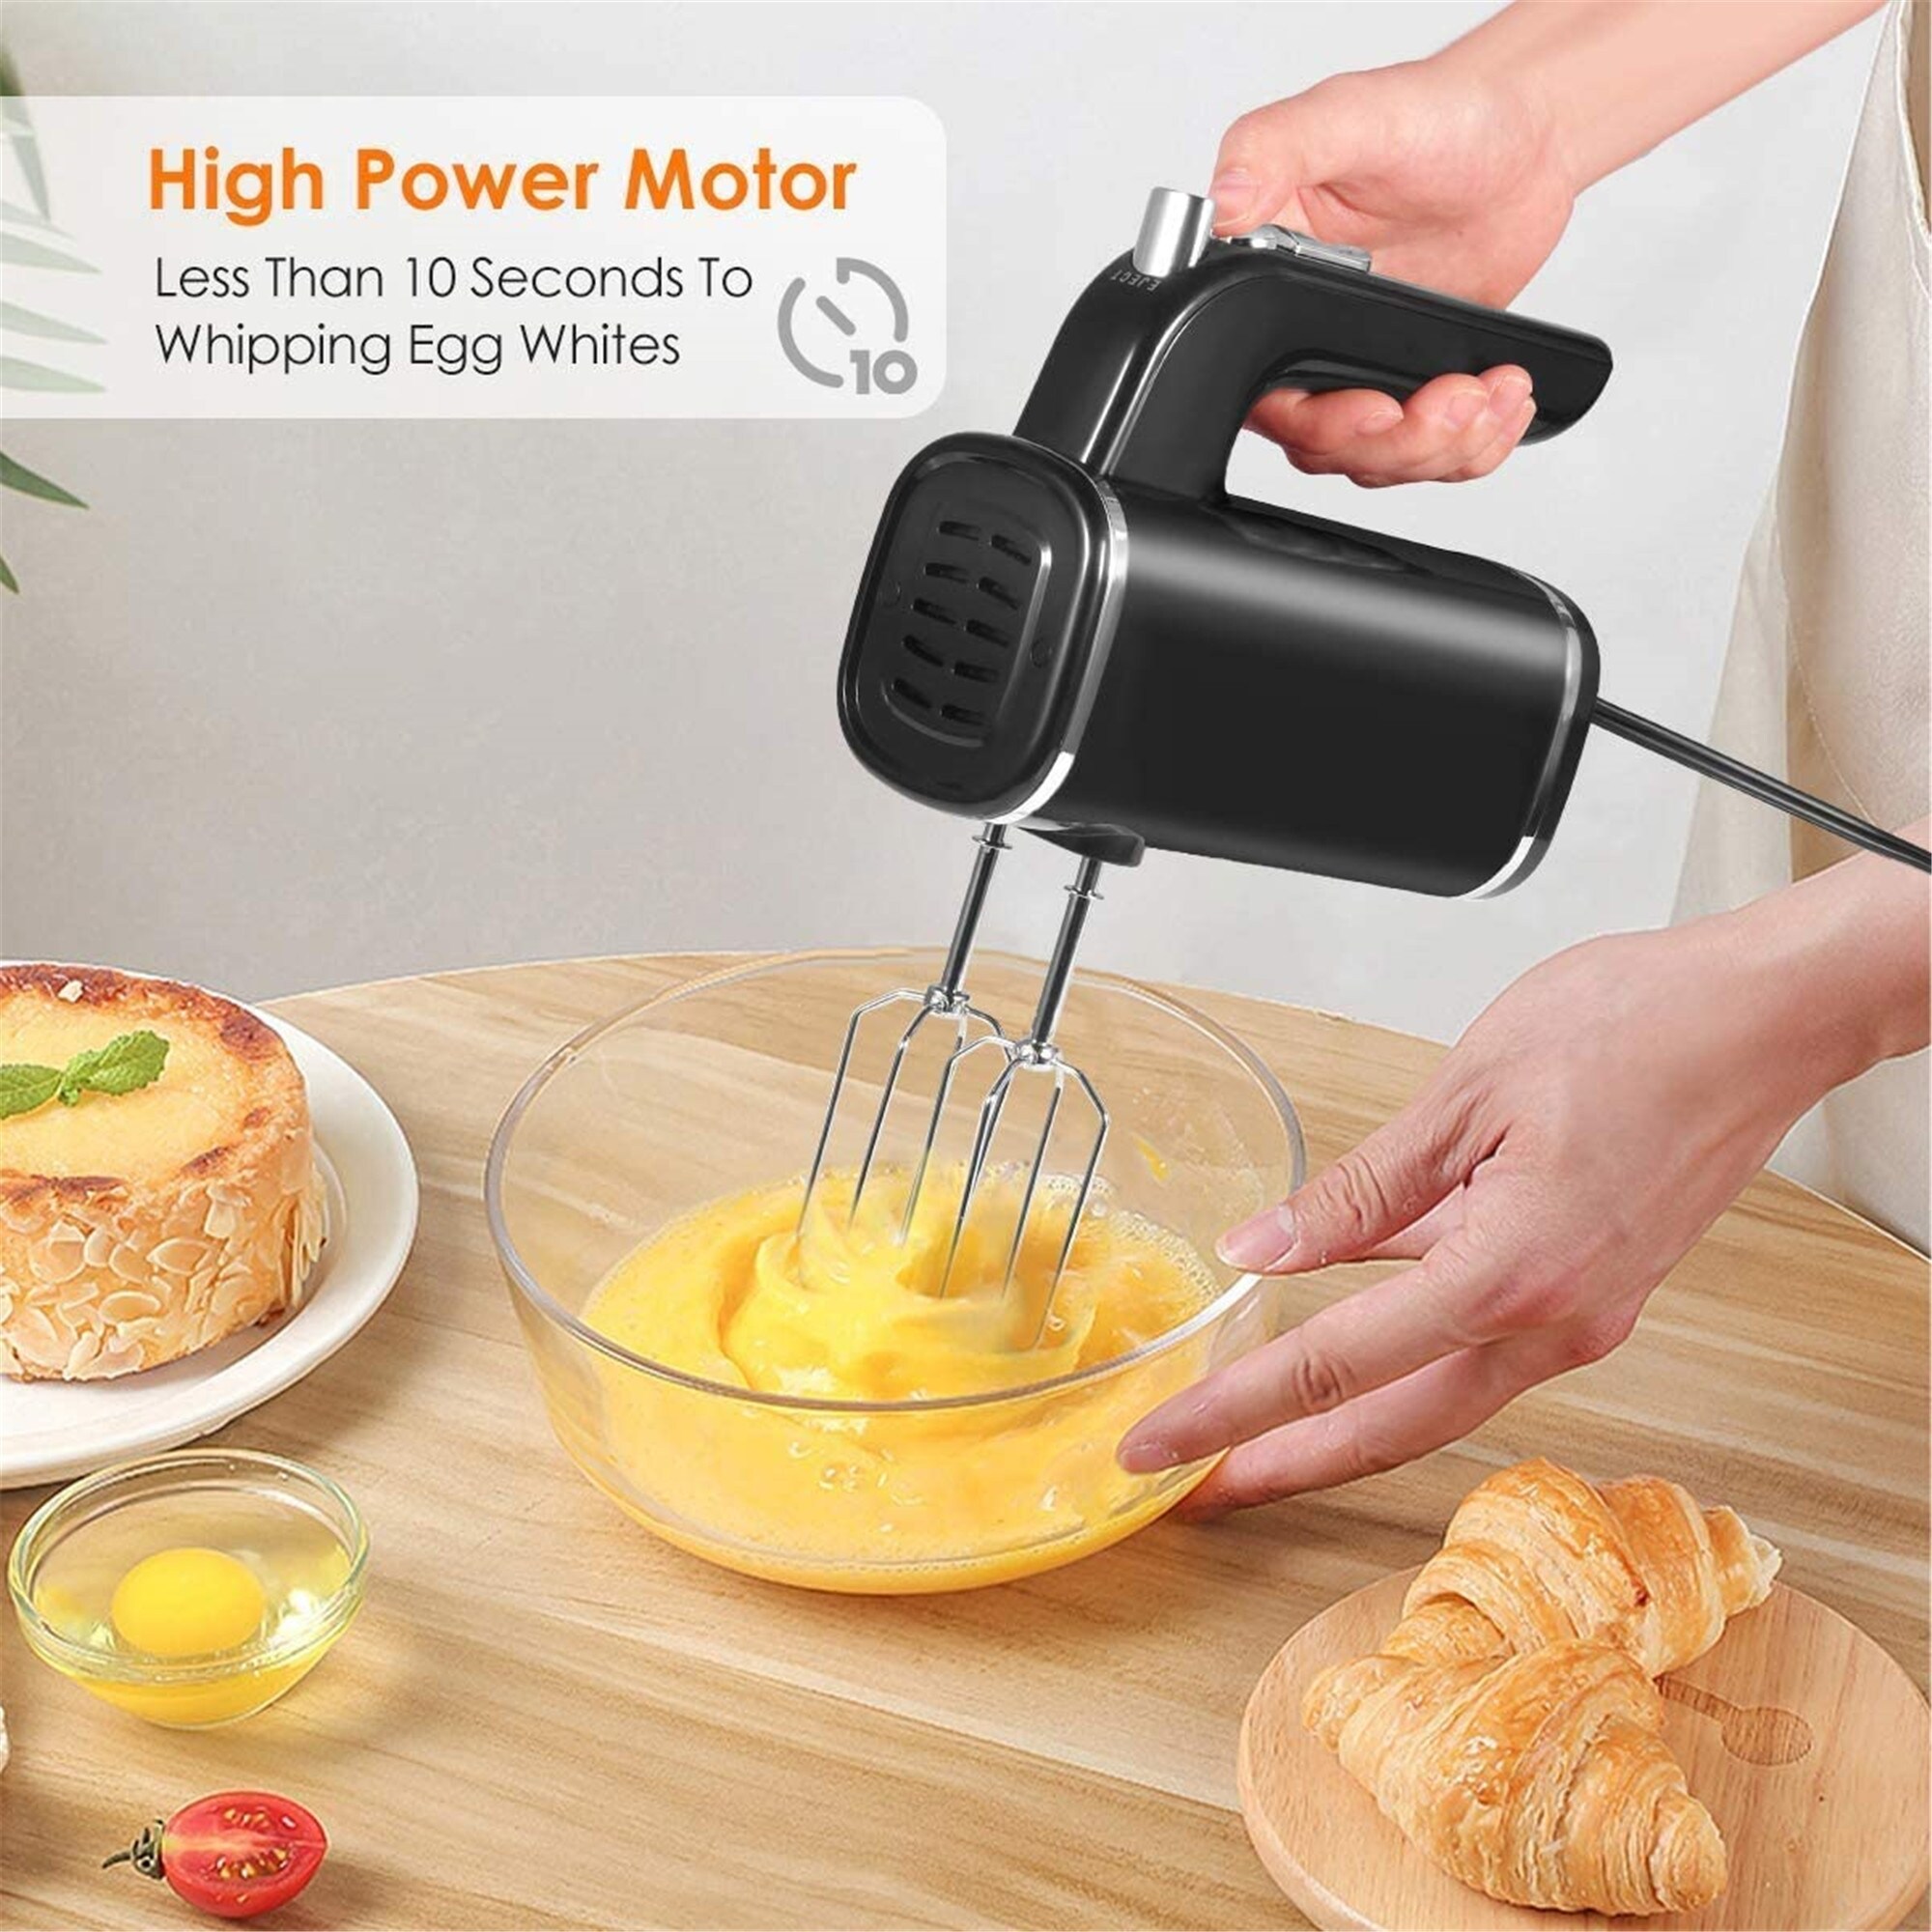 Hand Mixer Electric, Turbo Boost/Self-Control Speed + 4 Stainless Steel  Accessories - 7.72 x 6.73 x 3.9 inches - Bed Bath & Beyond - 33121930